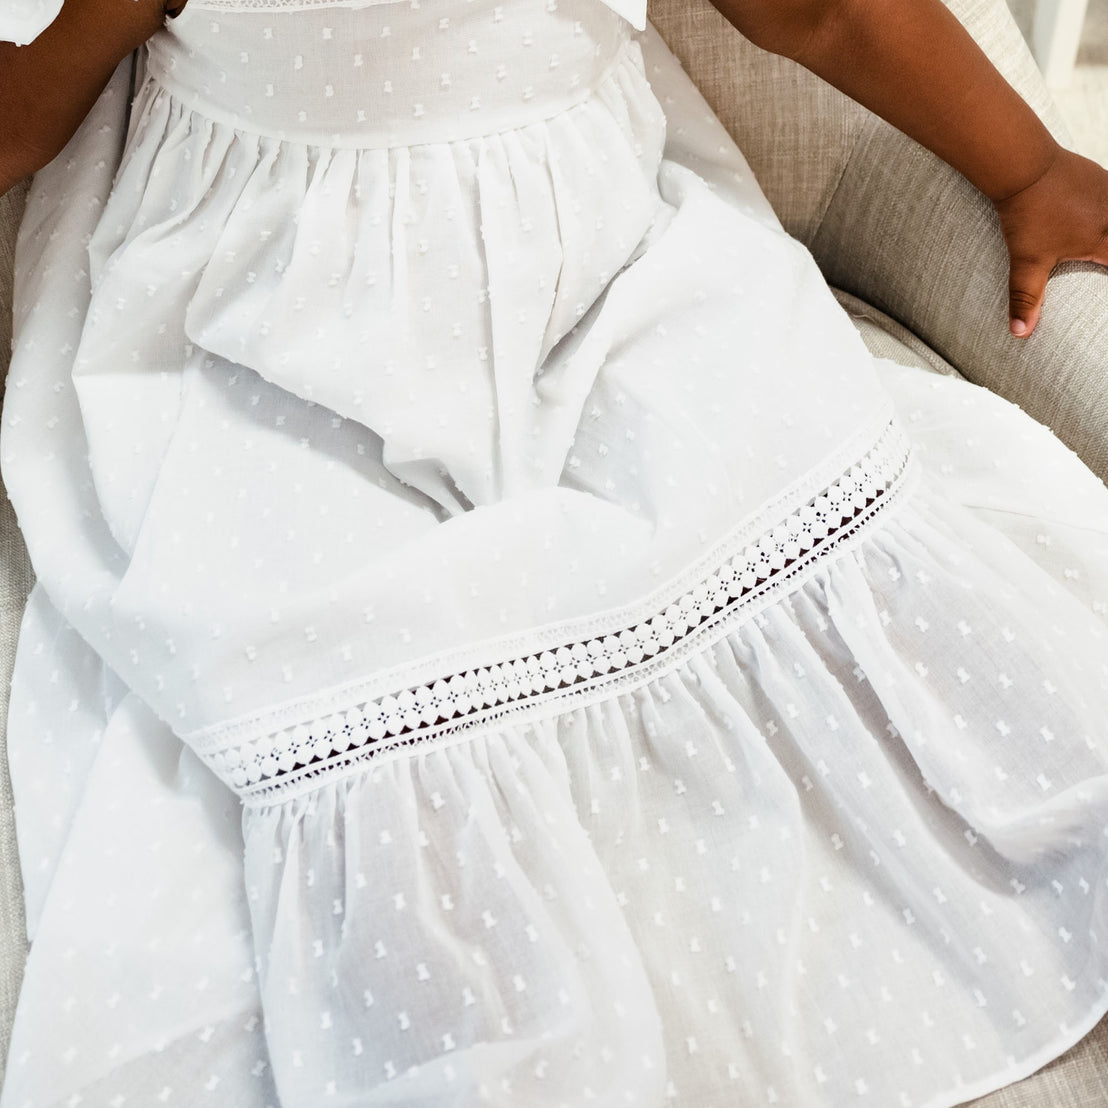 A close-up of a toddler sitting on a sofa, wearing the Mila Cotton Gown. The photo showcases the dotted patterns and lace details, as well as, the texture and design of the gown.